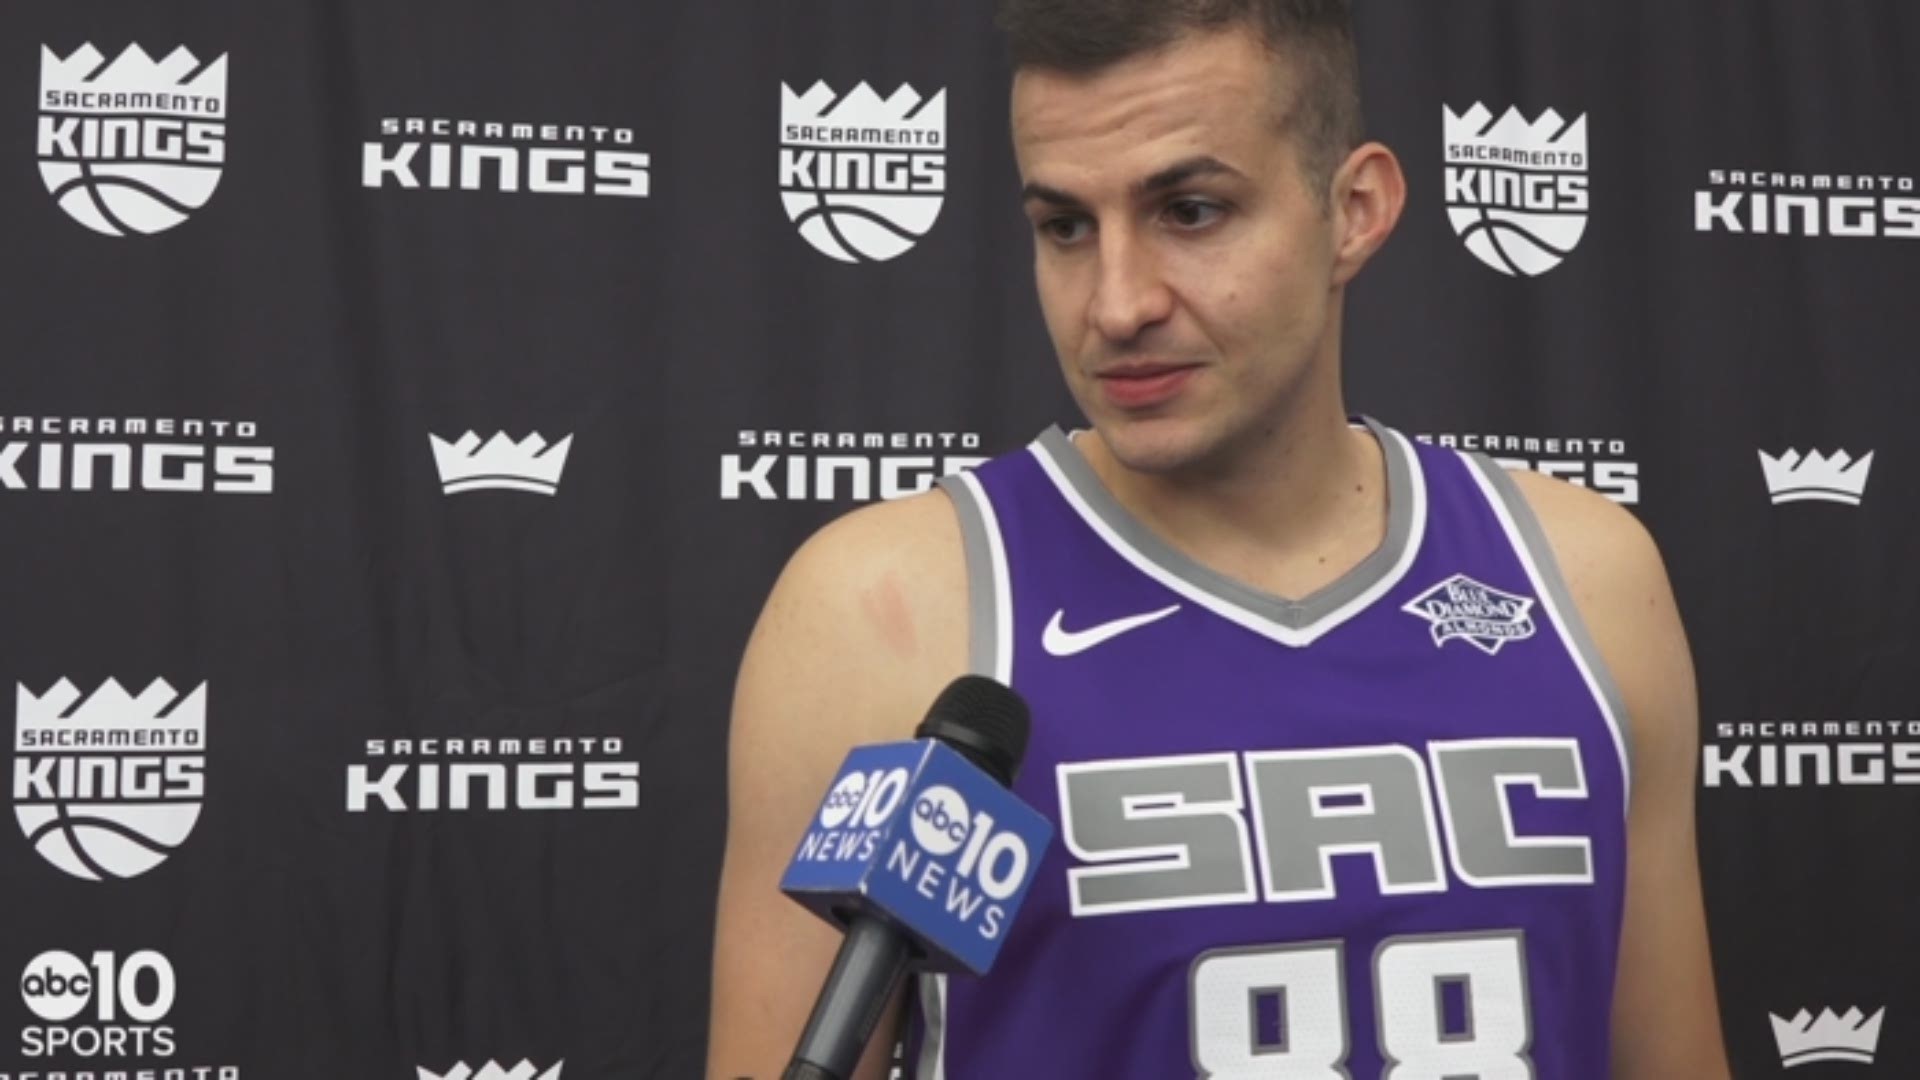 Nemanja Bjelica discusses his decision to join the Sacramento Kings this summer after speaking with GM Vlade Divac. He also talks about his decision to wear the unusual jersey number 88.